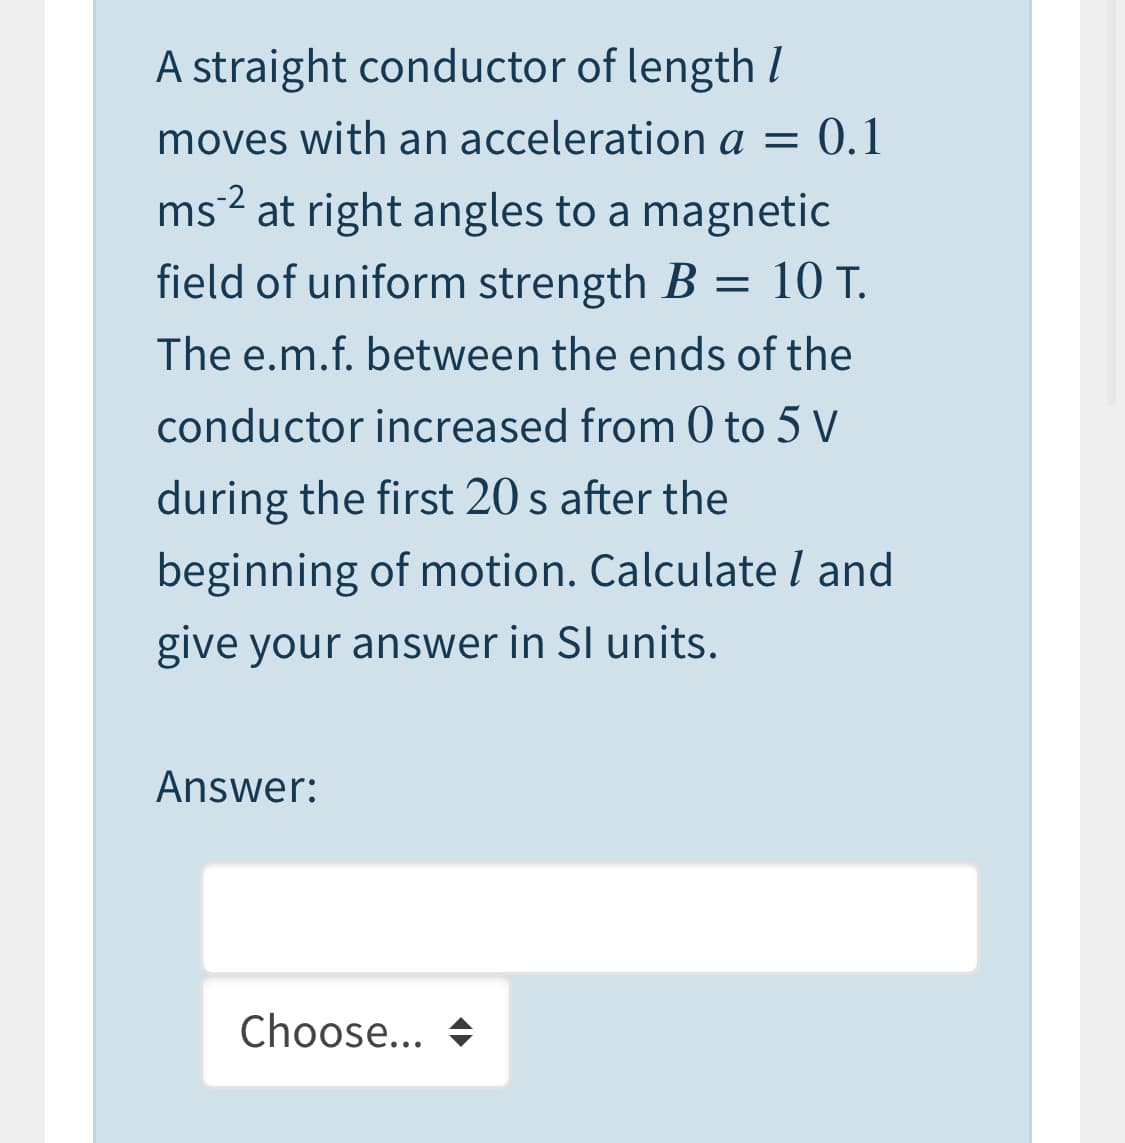 A straight conductor of length I
moves with an acceleration a = 0.1
ms² at right angles to a magnetic
field of uniform strength B = 10 T.
The e.m.f. between the ends of the
conductor increased from 0 to 5 V
during the first 20 s after the
beginning of motion. Calculate l and
give your answer in SI units.
Answer:
Choose... +
